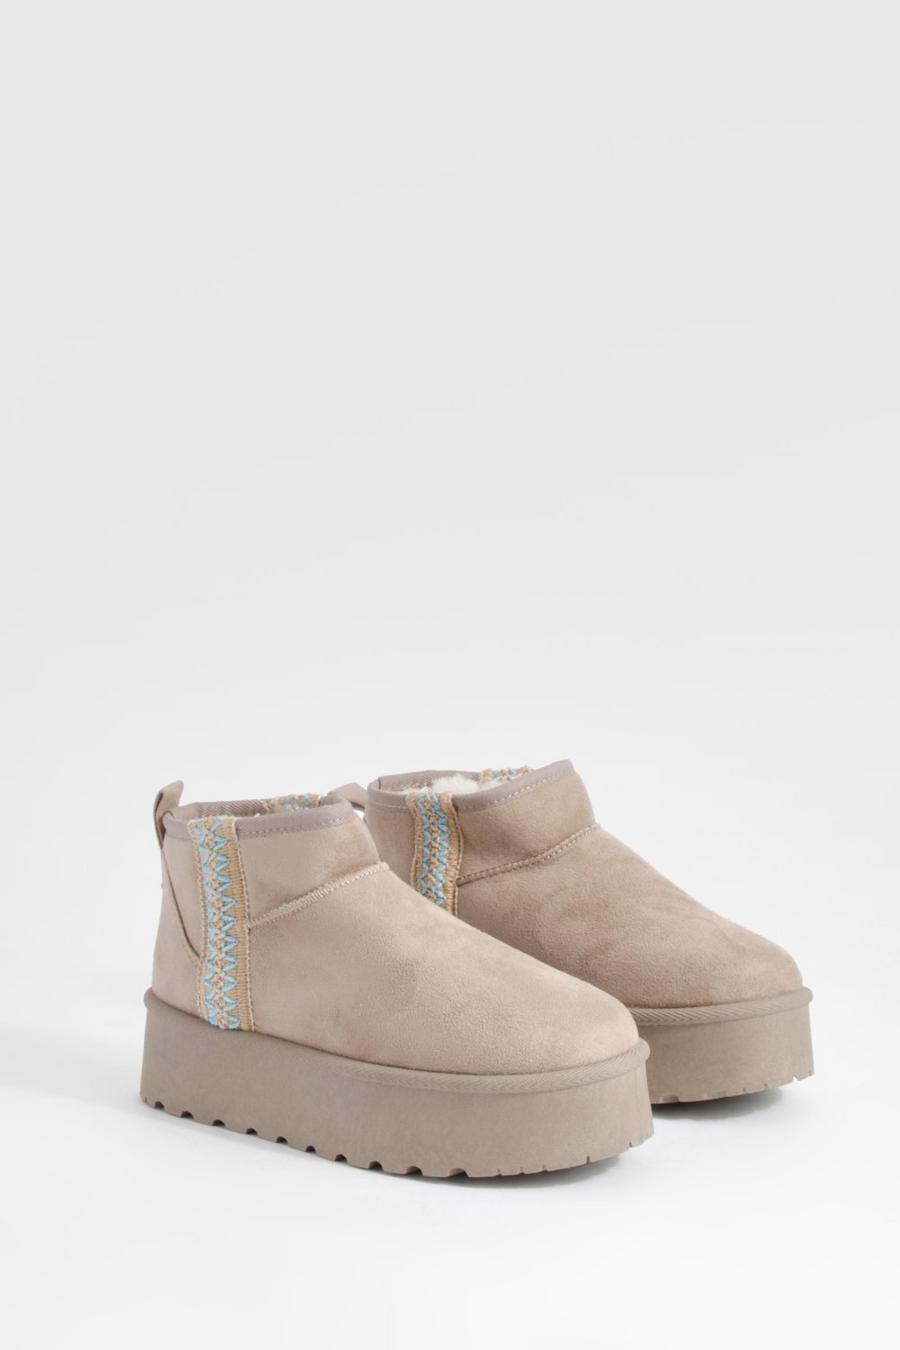 Beige Ultra Mini Embroidered Platform Cozy Boots